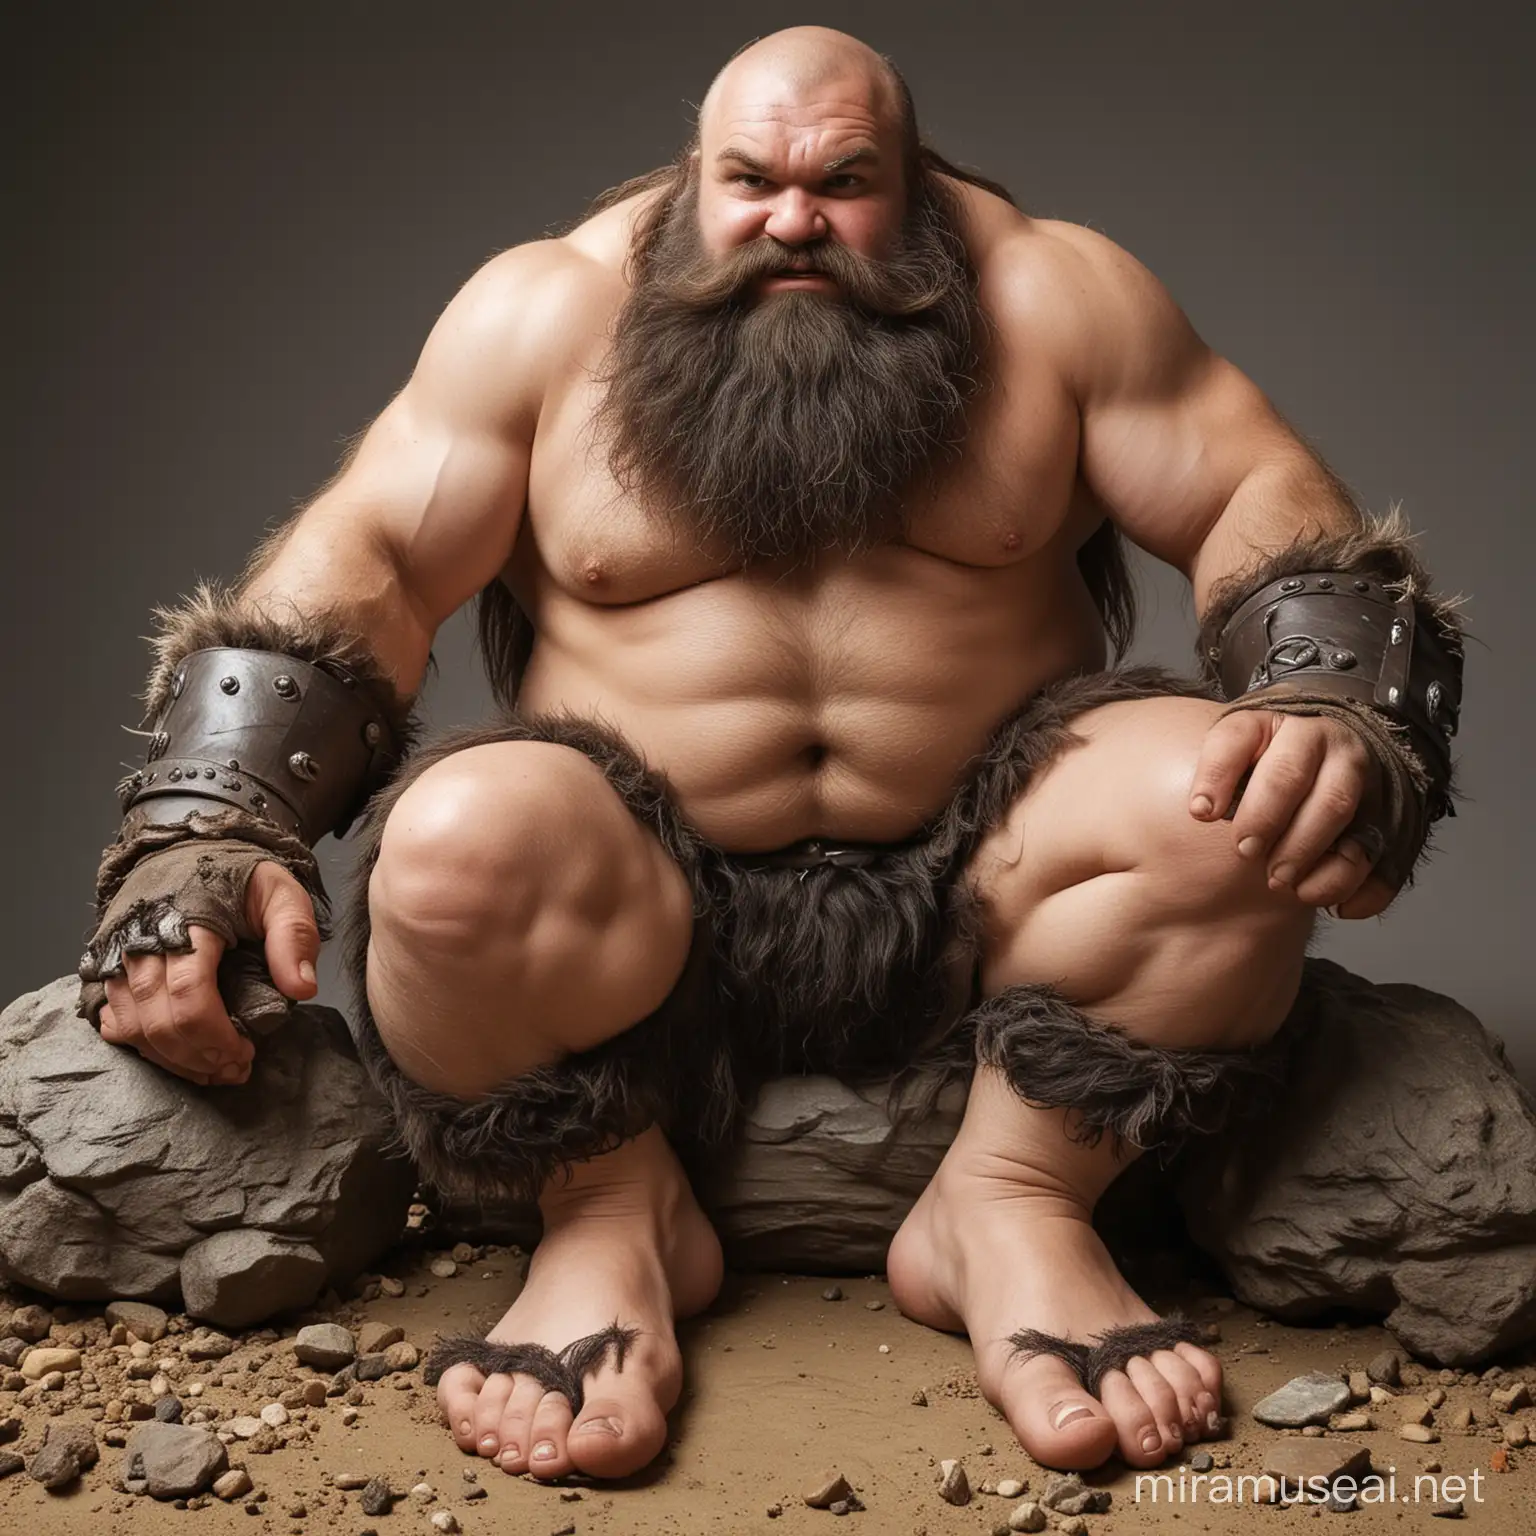 Primal Dwarf Slayer with Giant Feet and Hairy Beard